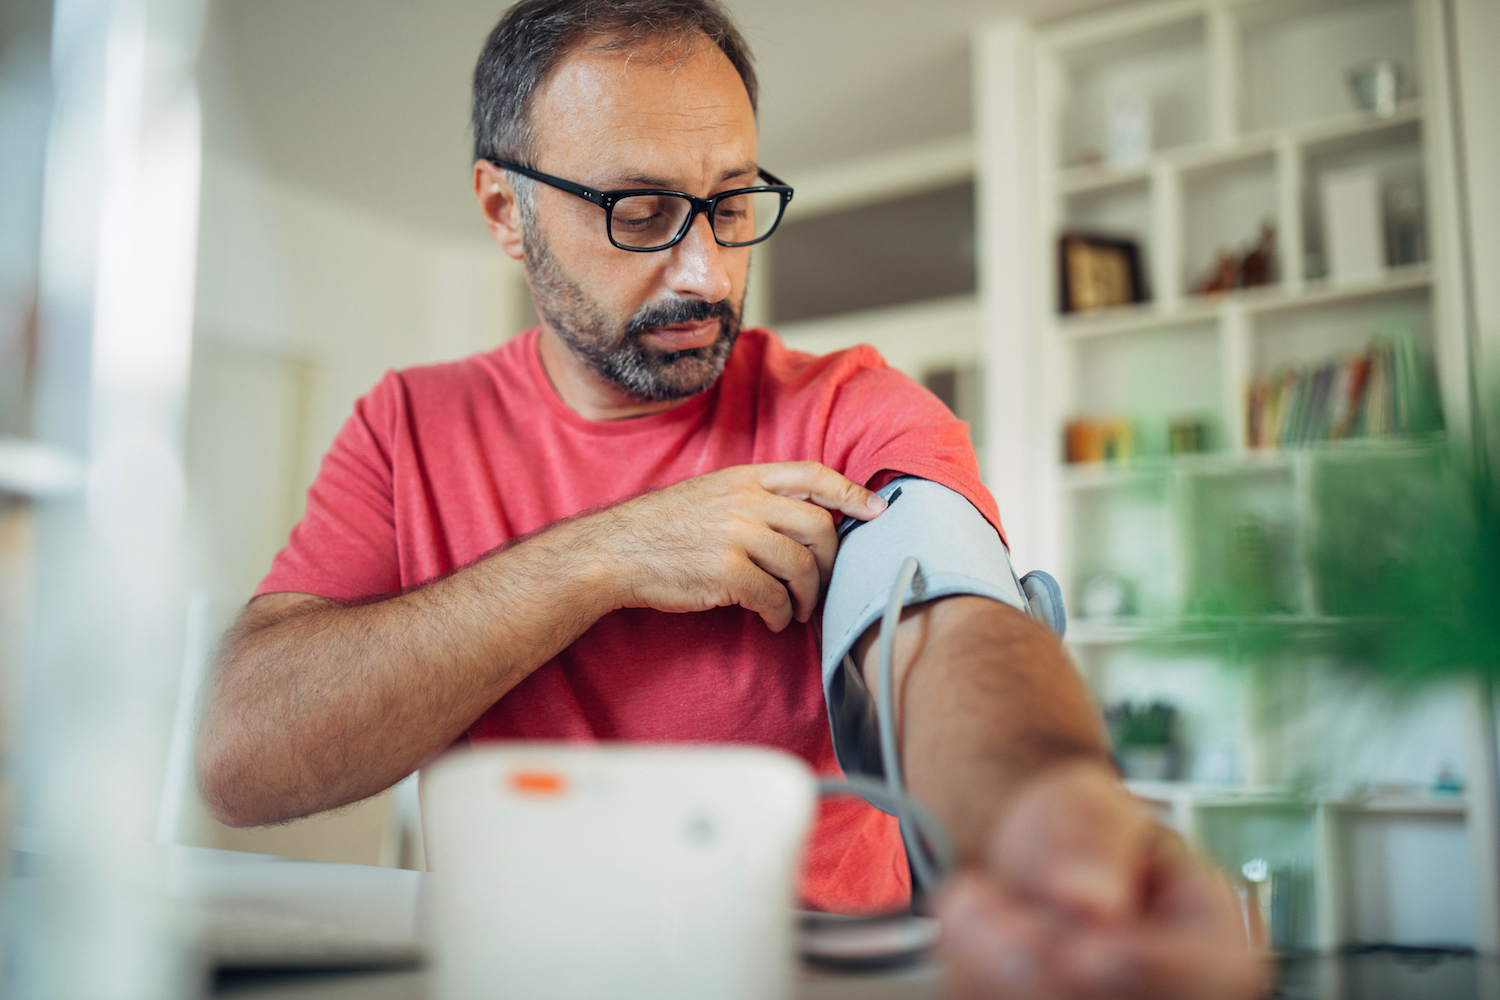 Man with glasses and red t-shirt using a blood pressure cuff at home